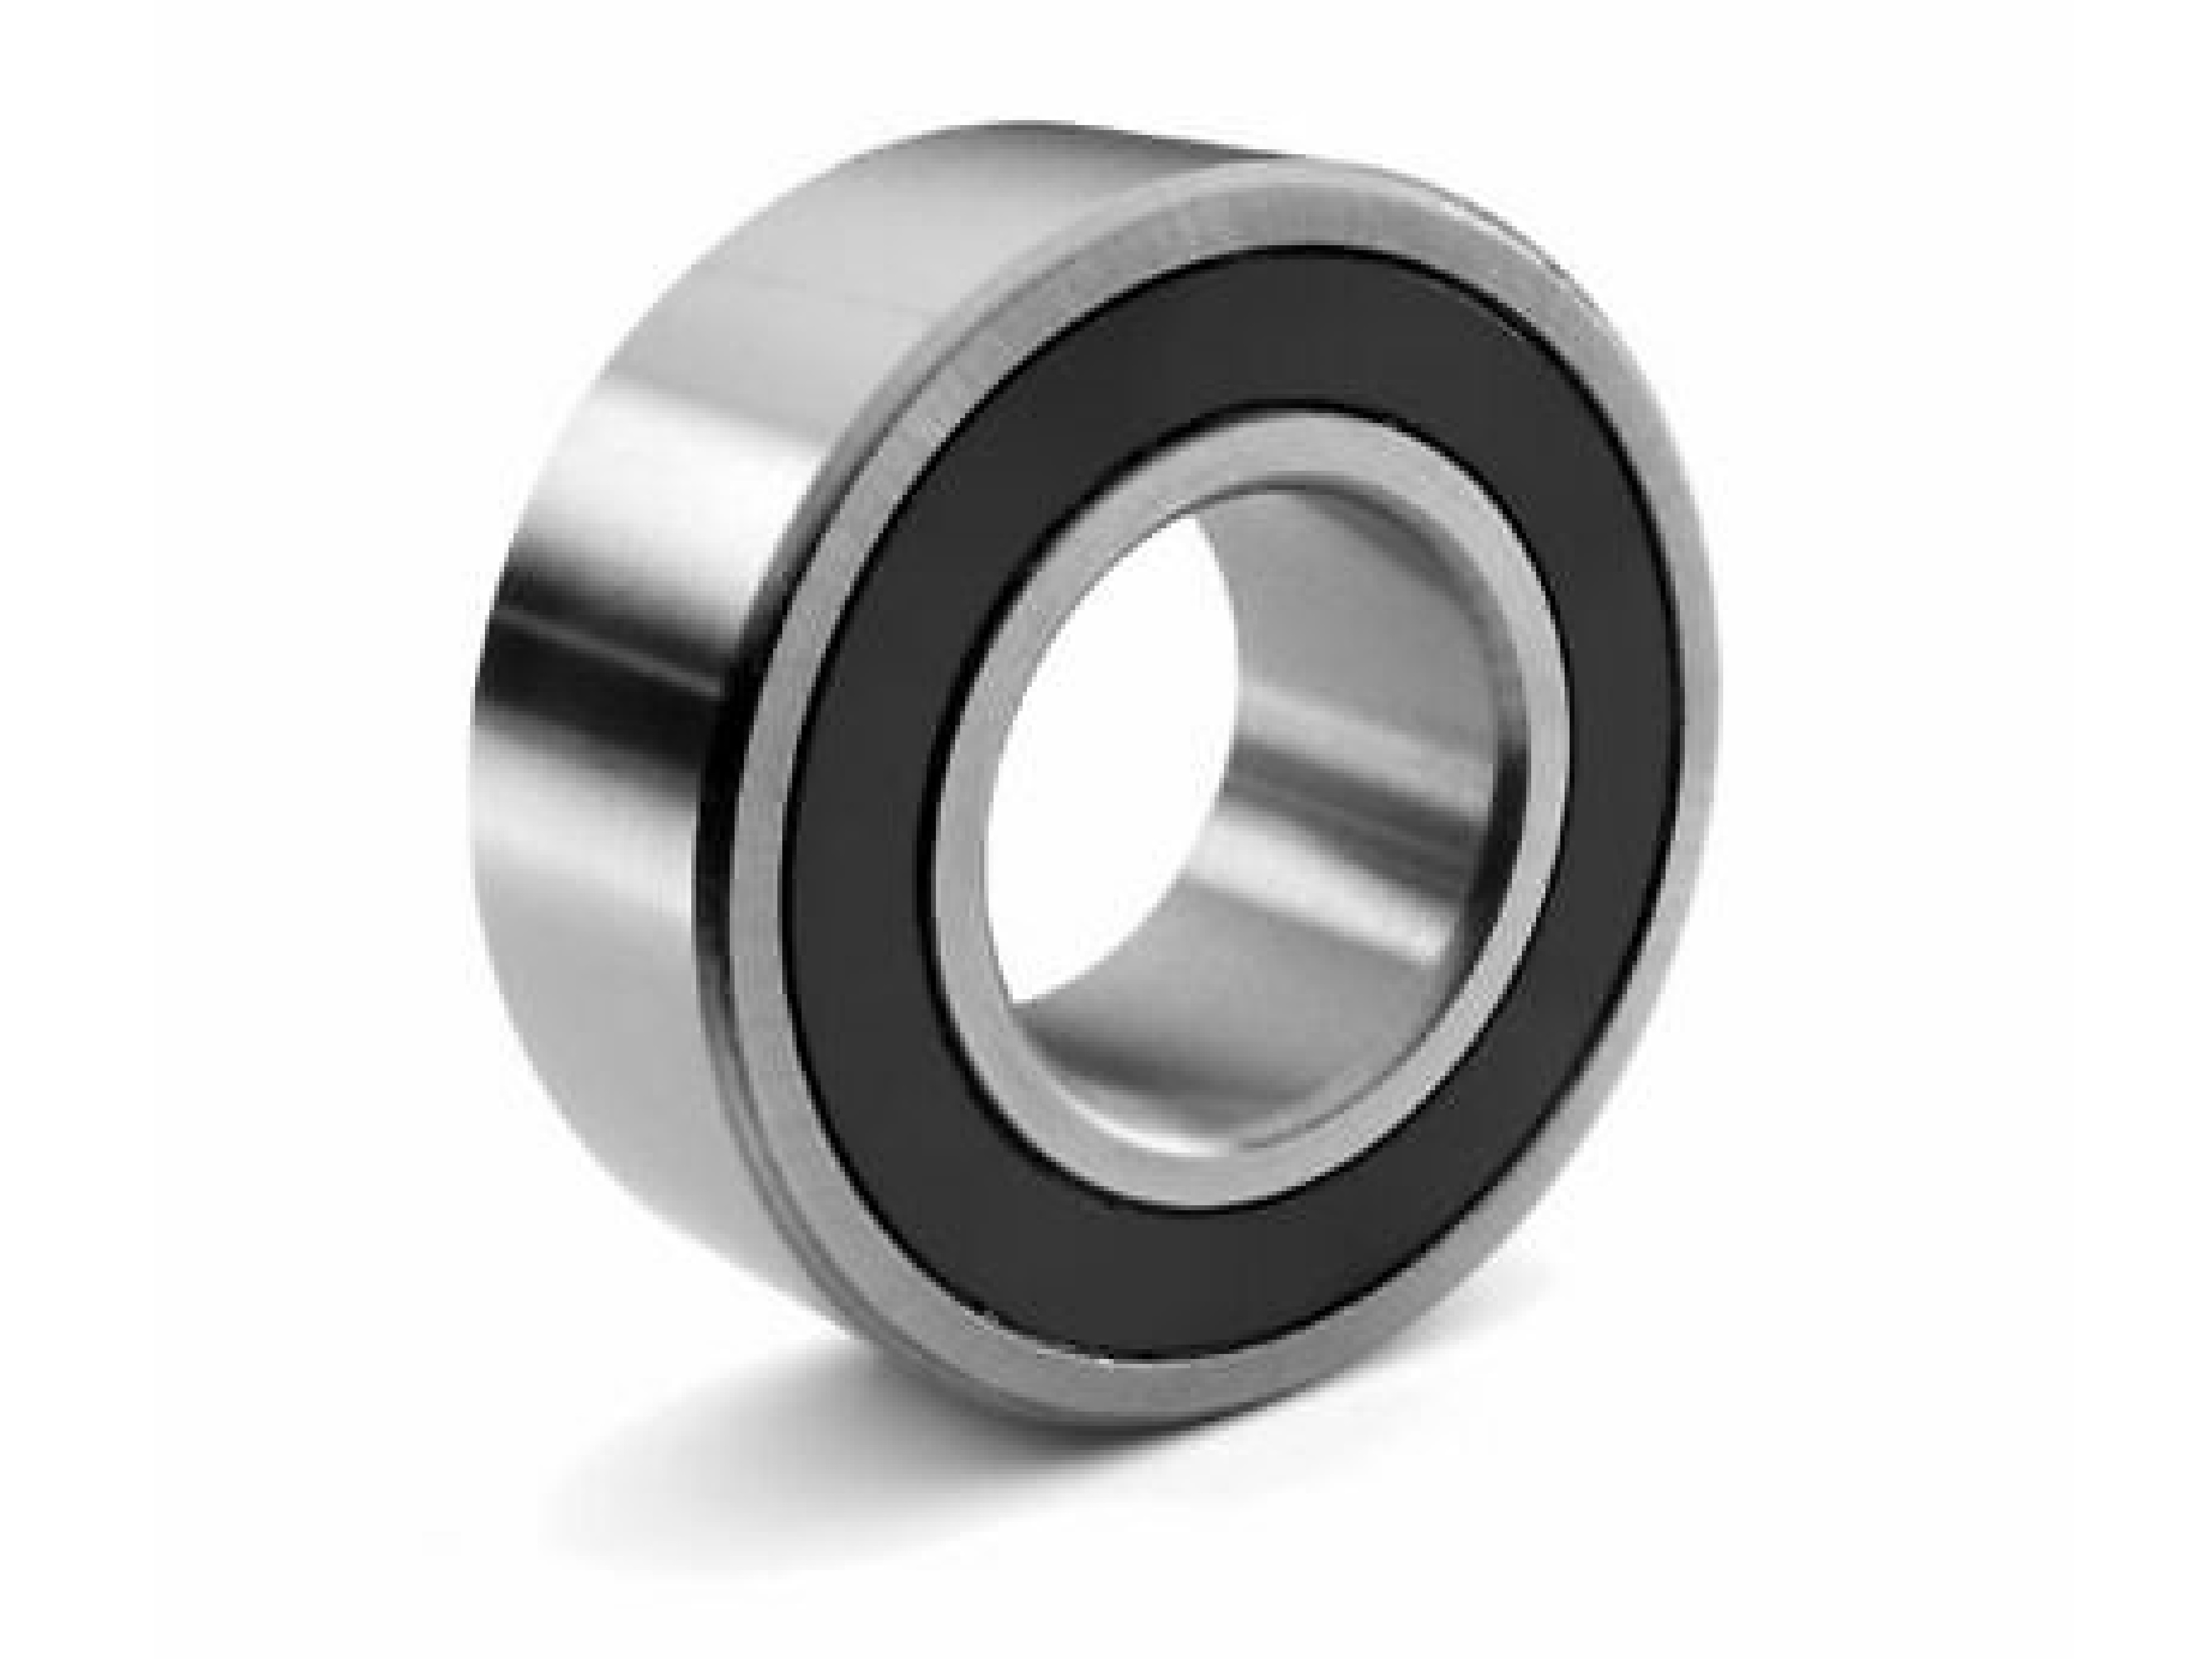 4207-2RS Sealed Double Row Ball Bearing 35mm x 72mm x 23mm